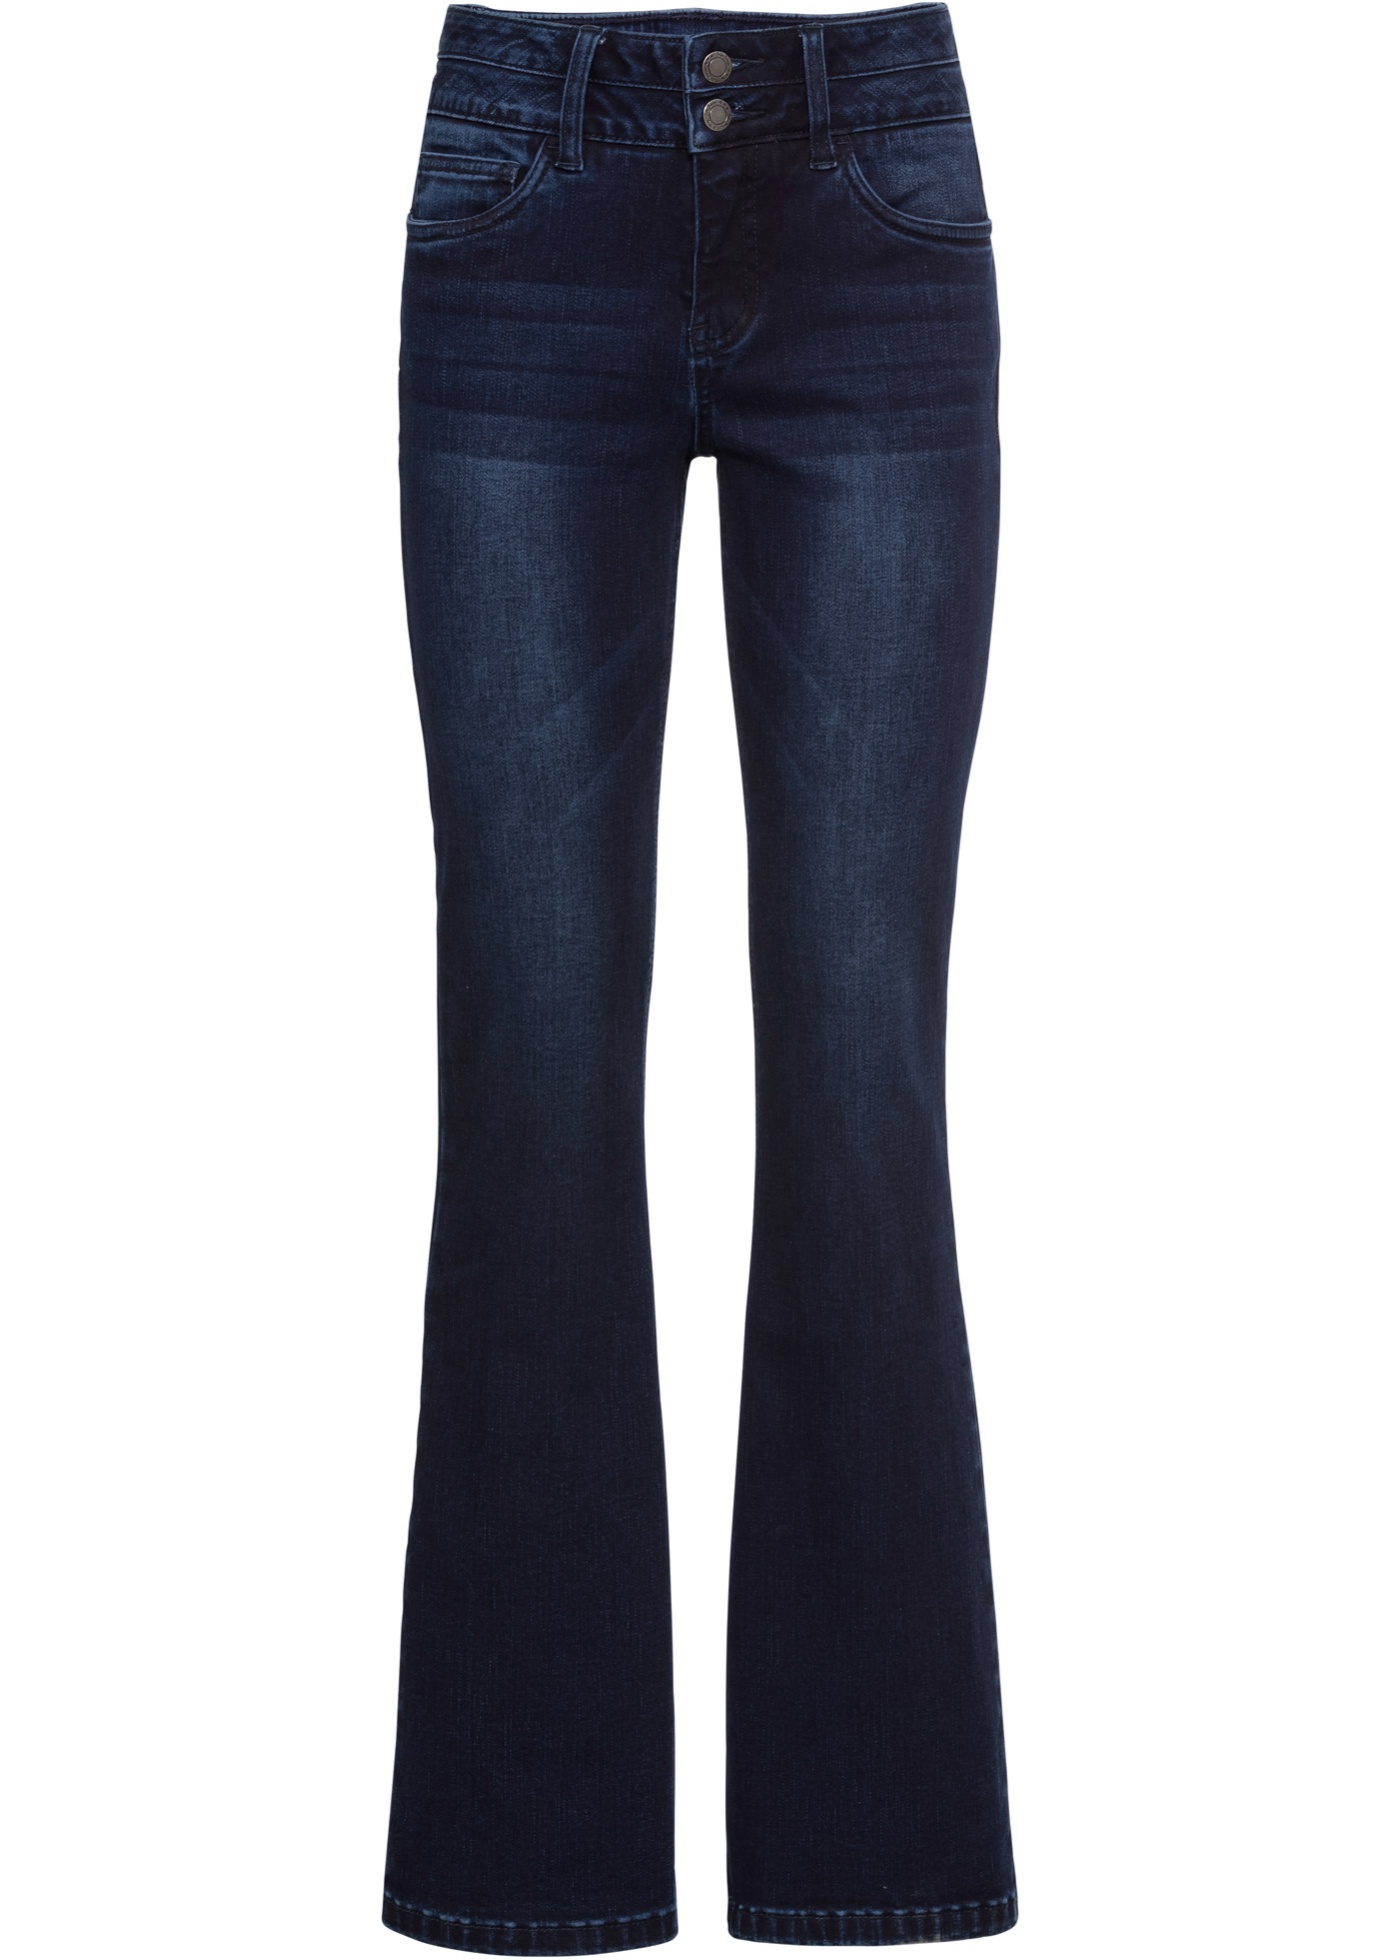 Corrigerende stretch jeans, bootcut